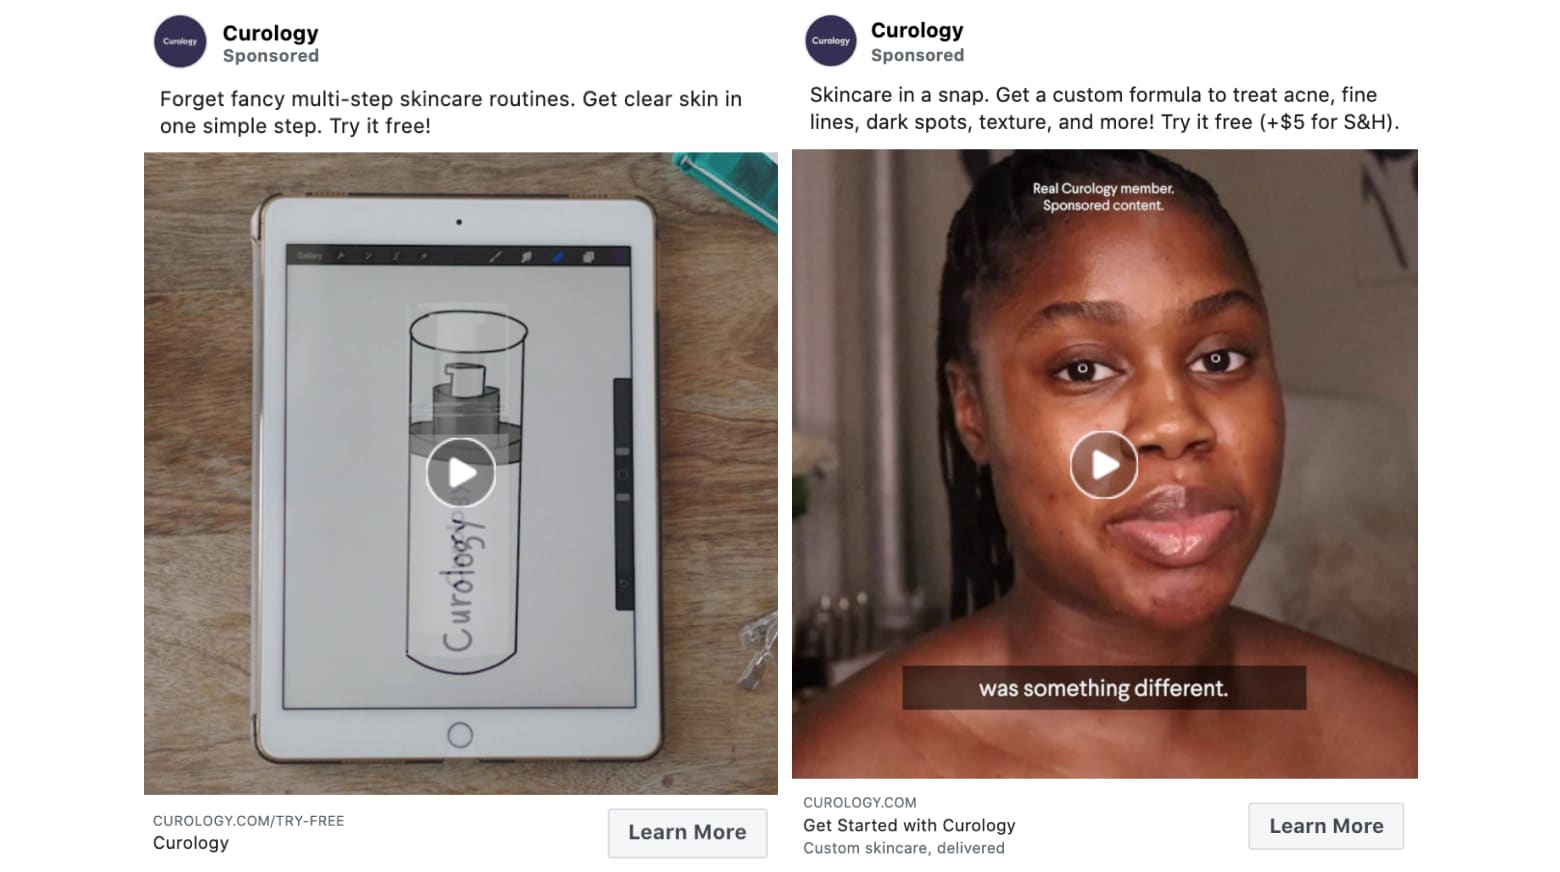 Two Curology ads. The left ad displays a custom skincare bottle on a tablet showcasing its seamless Shopify integration. The right ad features a person discussing skincare, with closed captions. Both ads offer a free trial with details and a link to learn more.